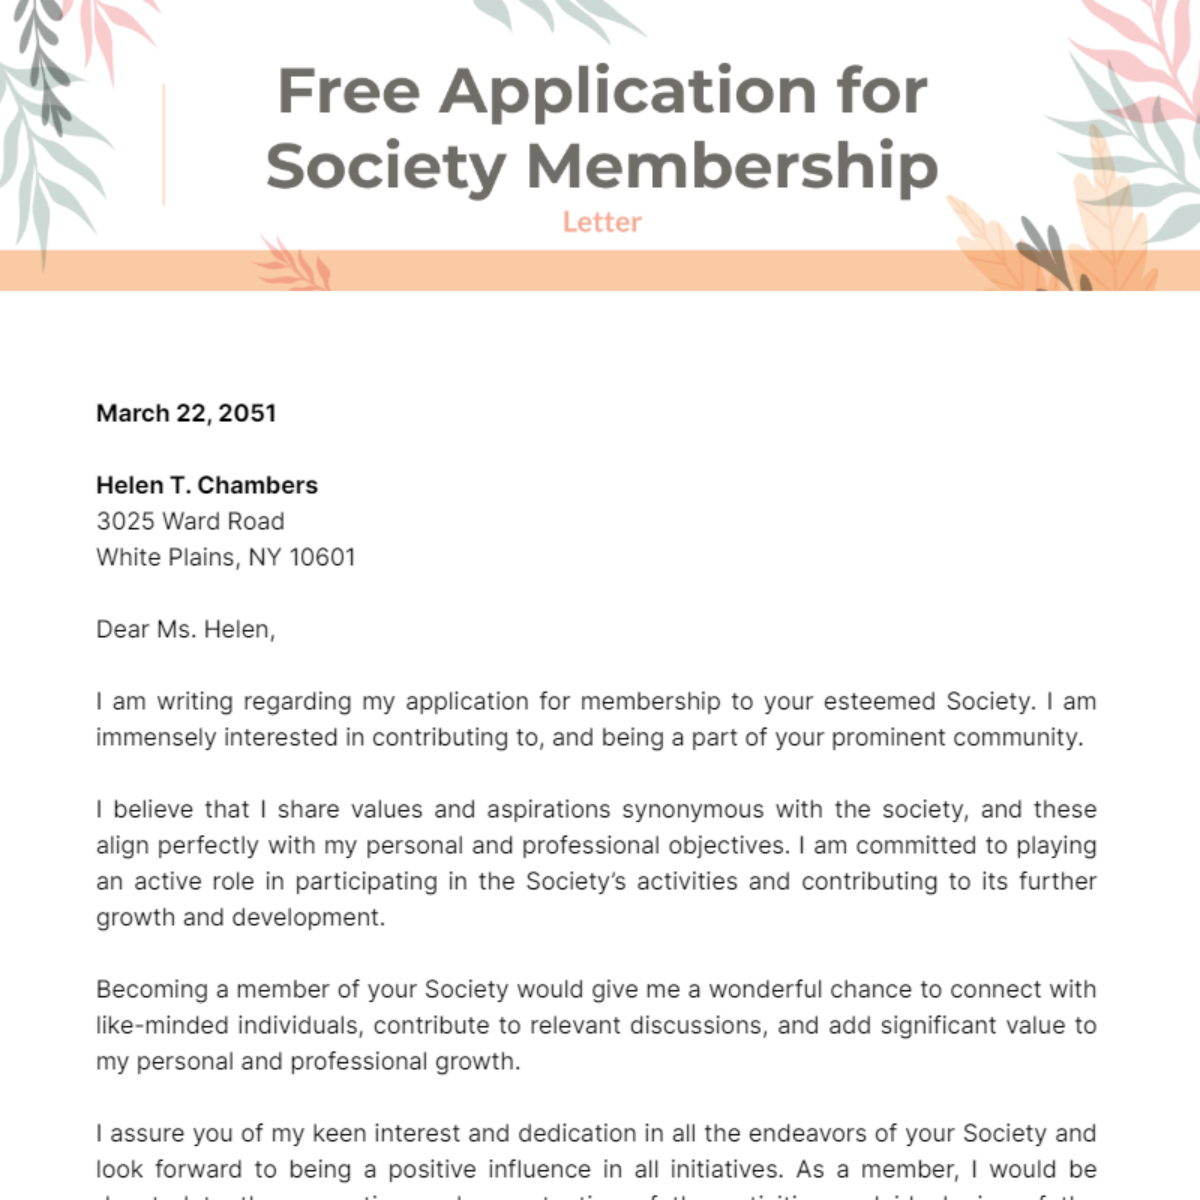 Application Letter for Society Membership Template